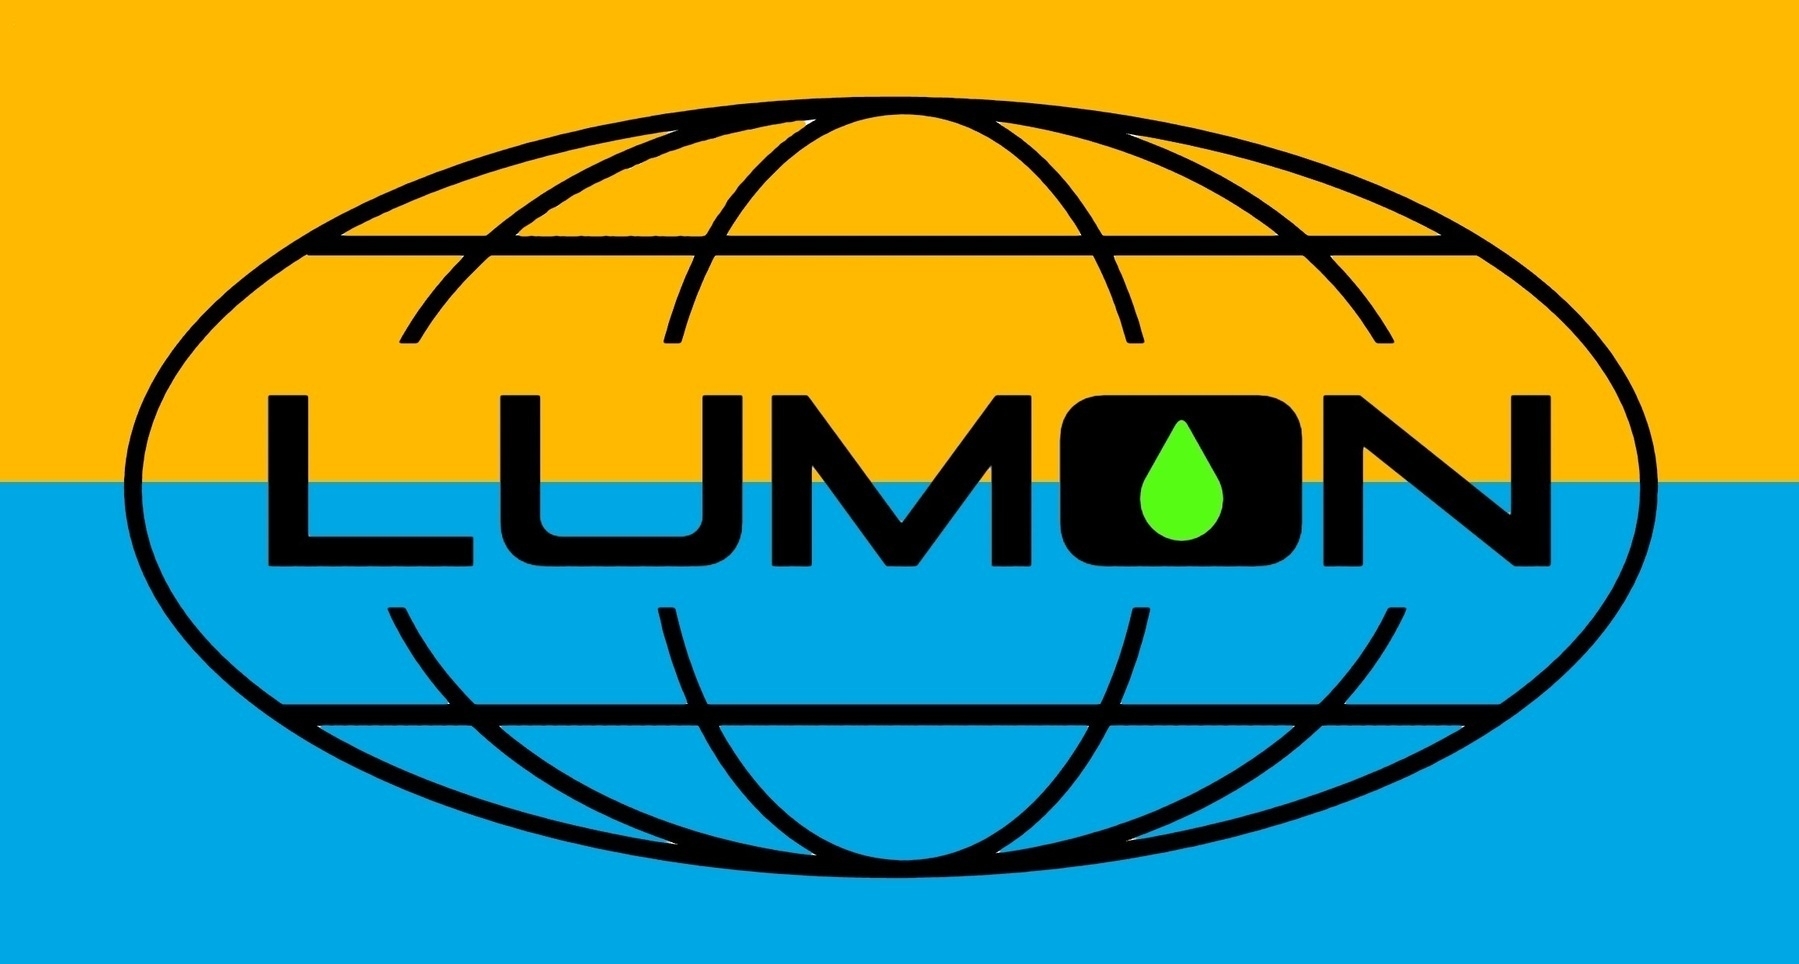 Lumon logo (the word on a globe) from the show ‘Severance’, with blue, yellow and green branding to match Hemispheric Views